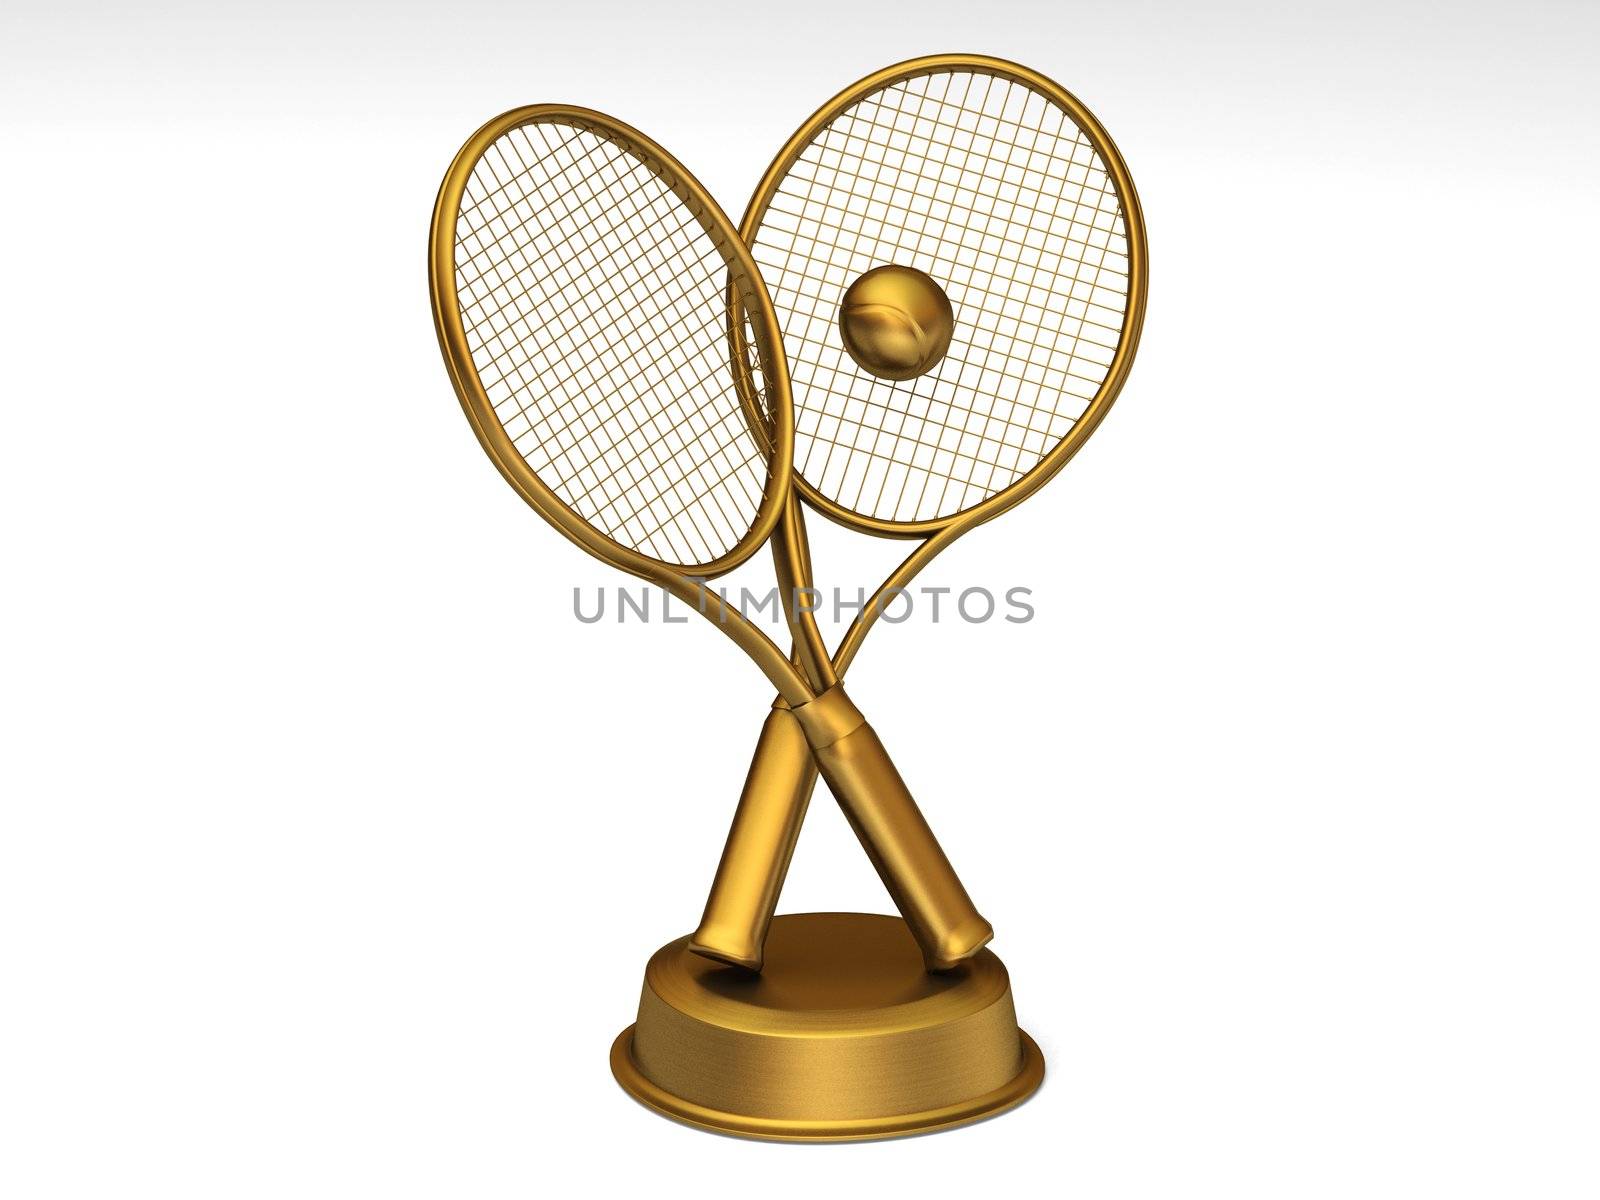 Golden tennis trophy by shkyo30